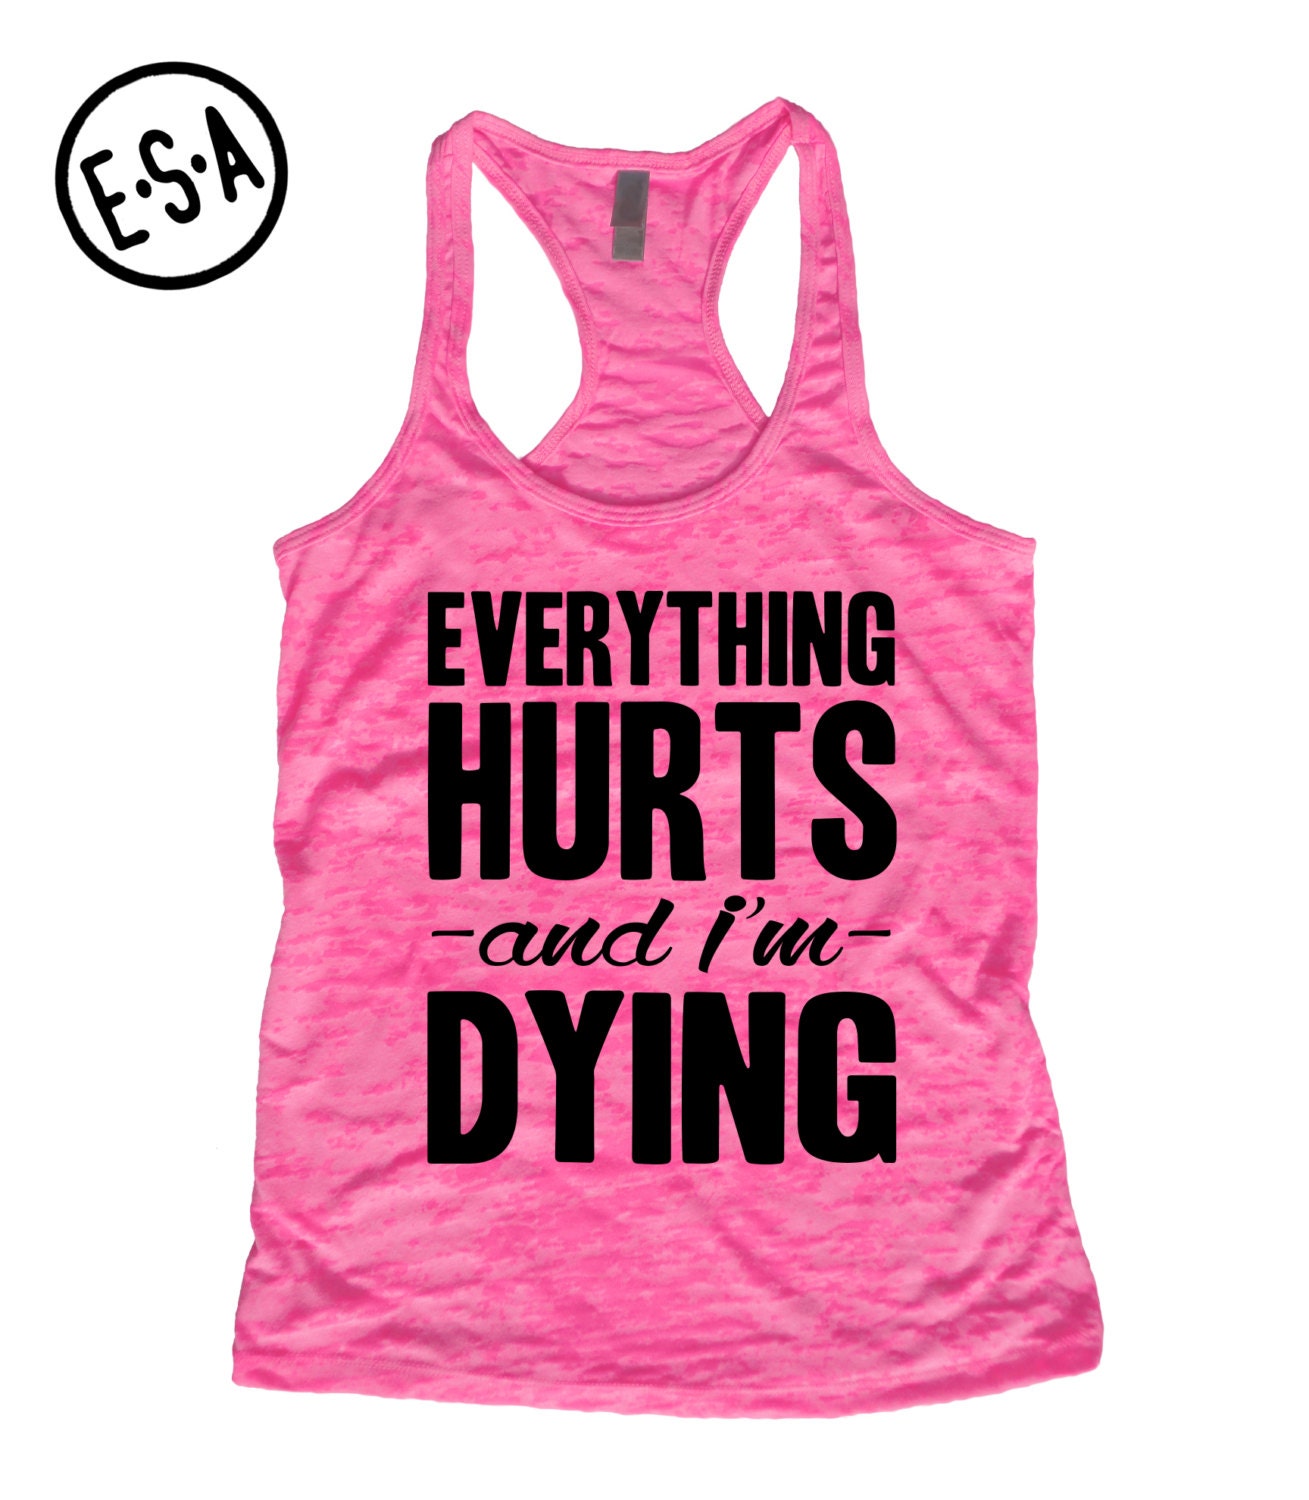 Everything Hurts And I'm Dying. Workout Tank. Run. Gym.